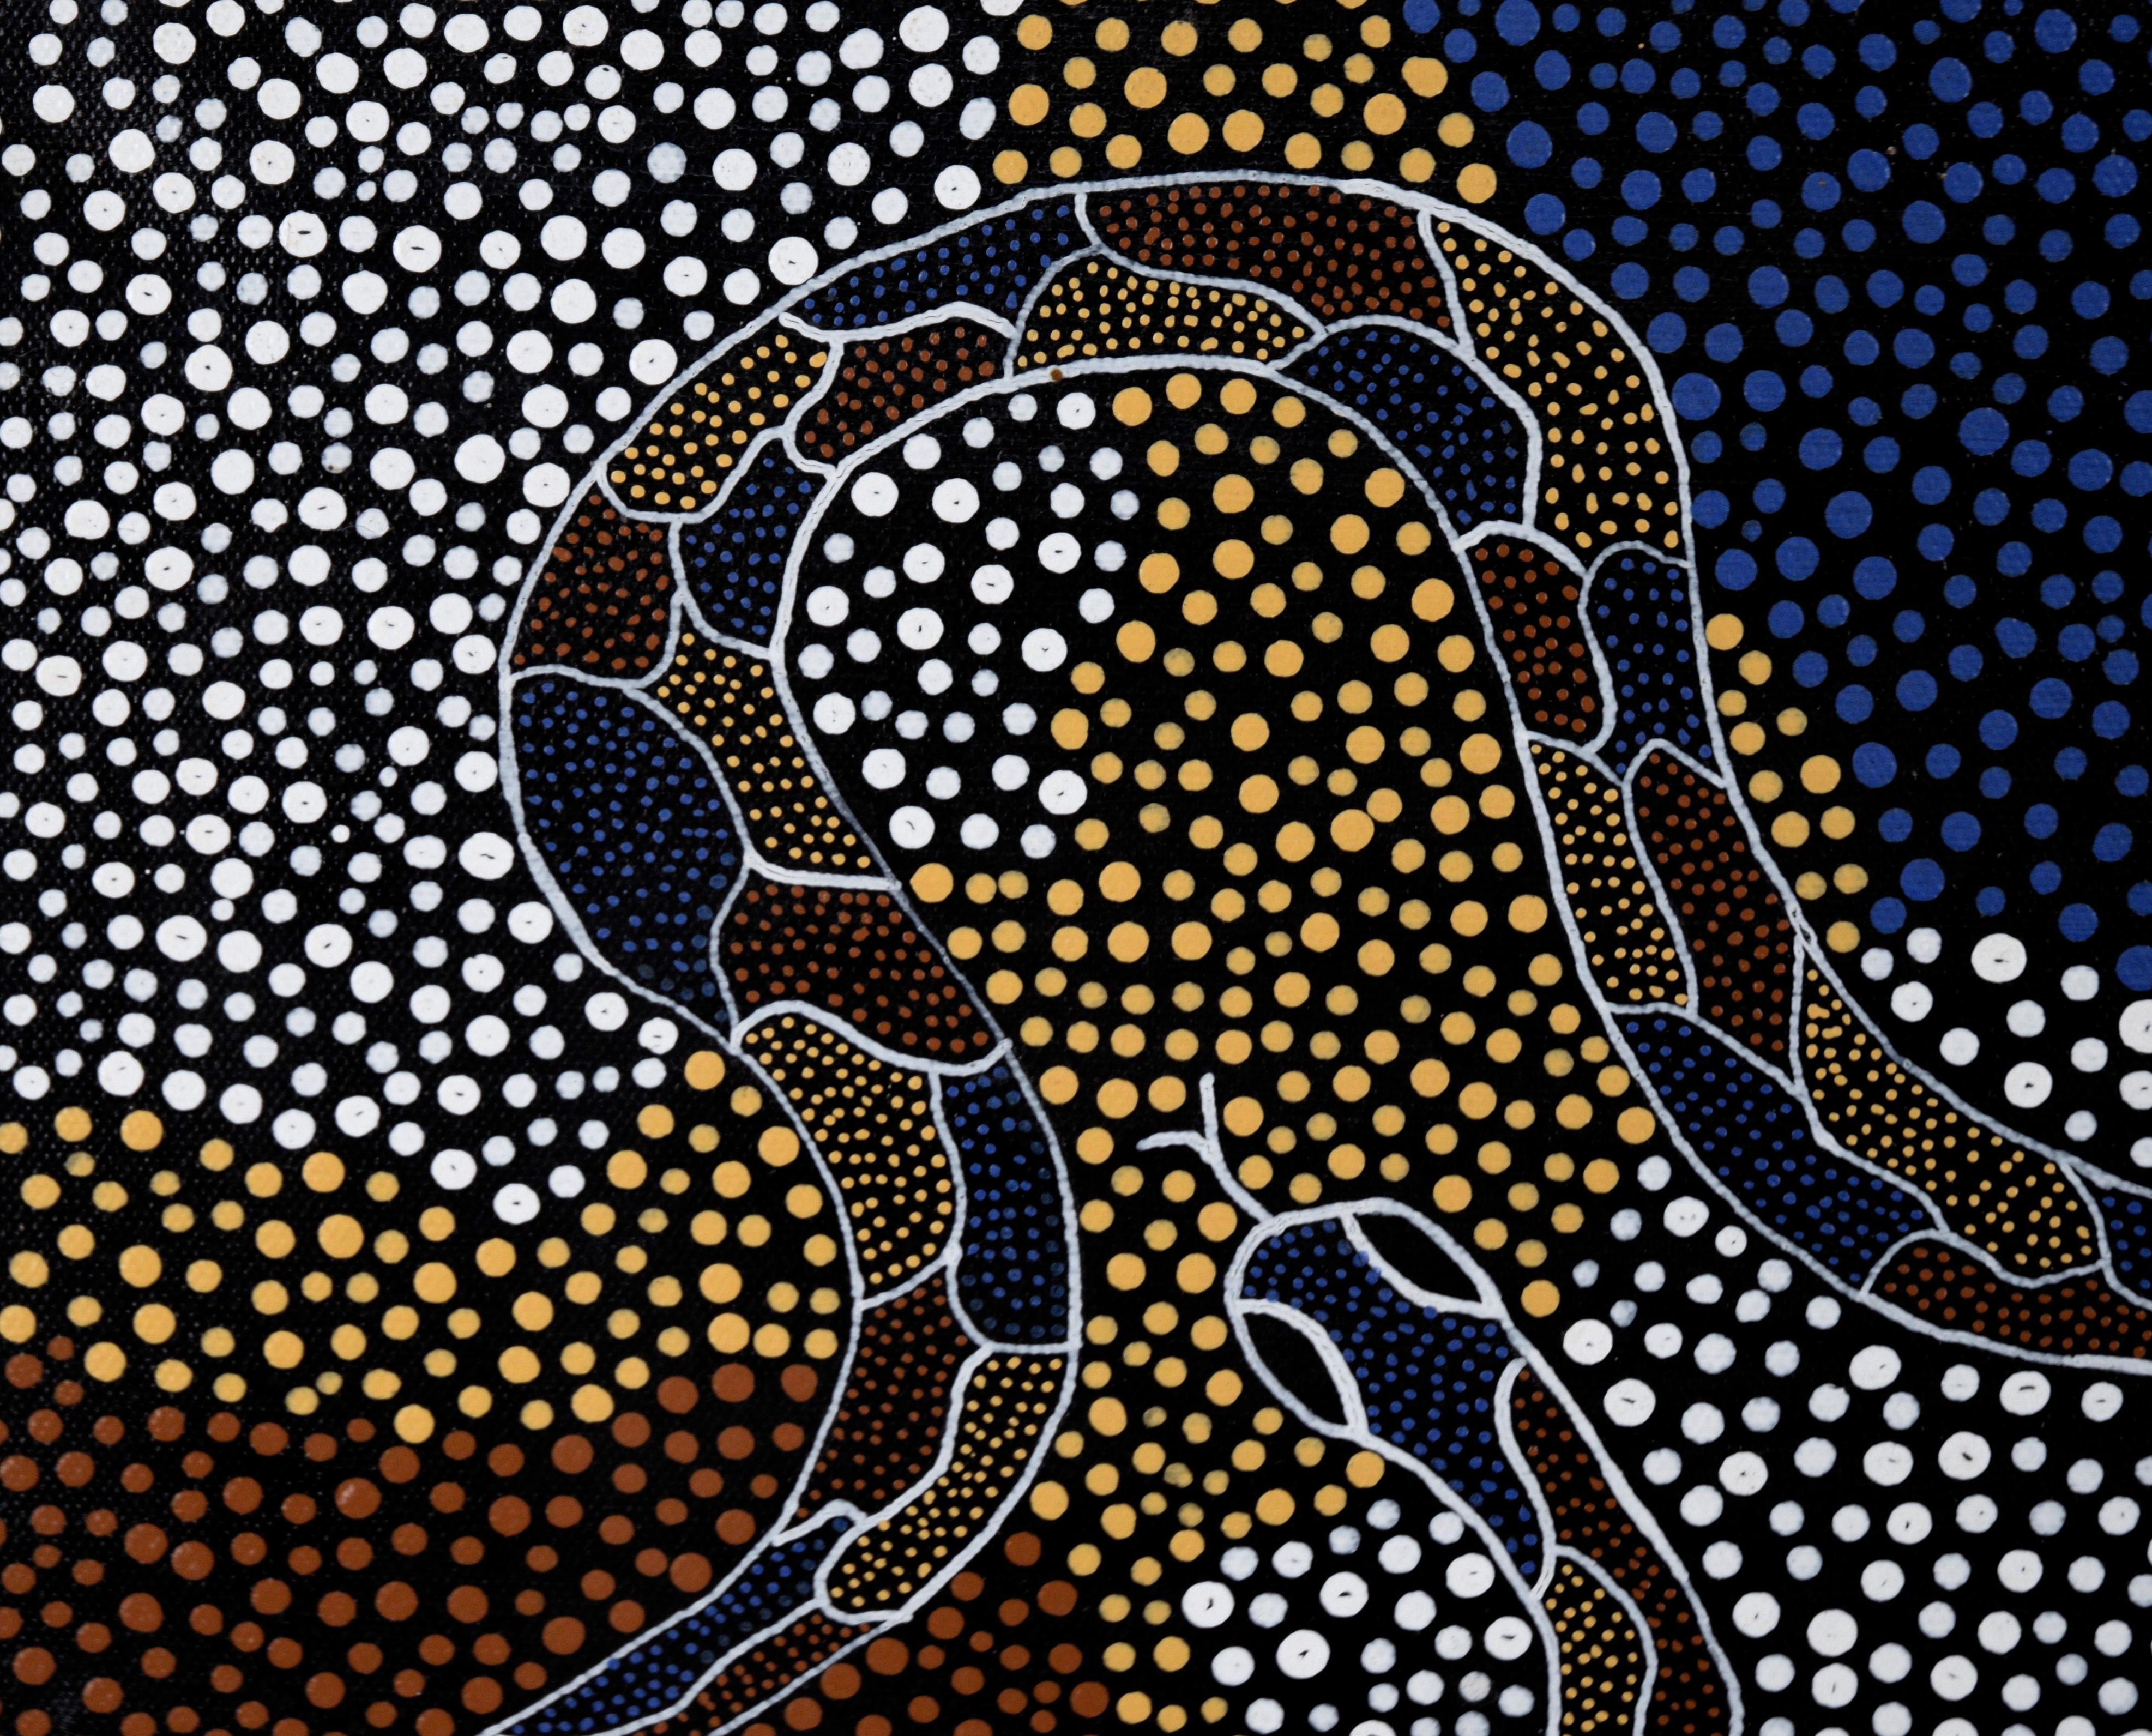 The Serpent - Aboriginal Dot Painting in Acrylic on Canvas

Bold dot painting with a snake by Aboriginal Australian artist Geoffrey 